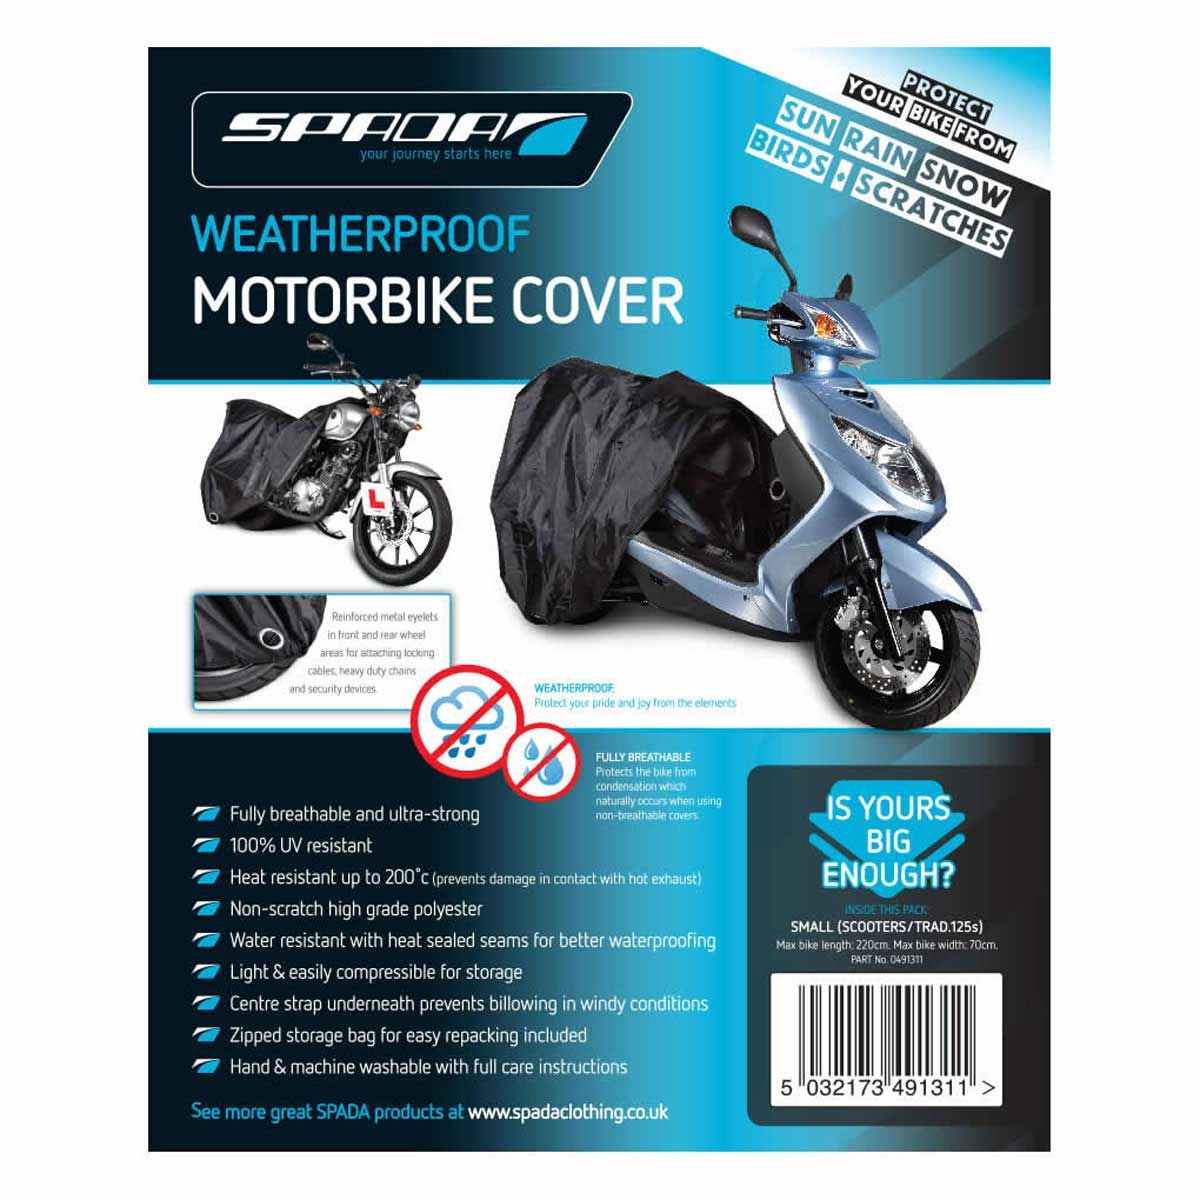 YAMAHA WR125X Oxford Motorcycle Cover Breathable Motorbike Black Grey 